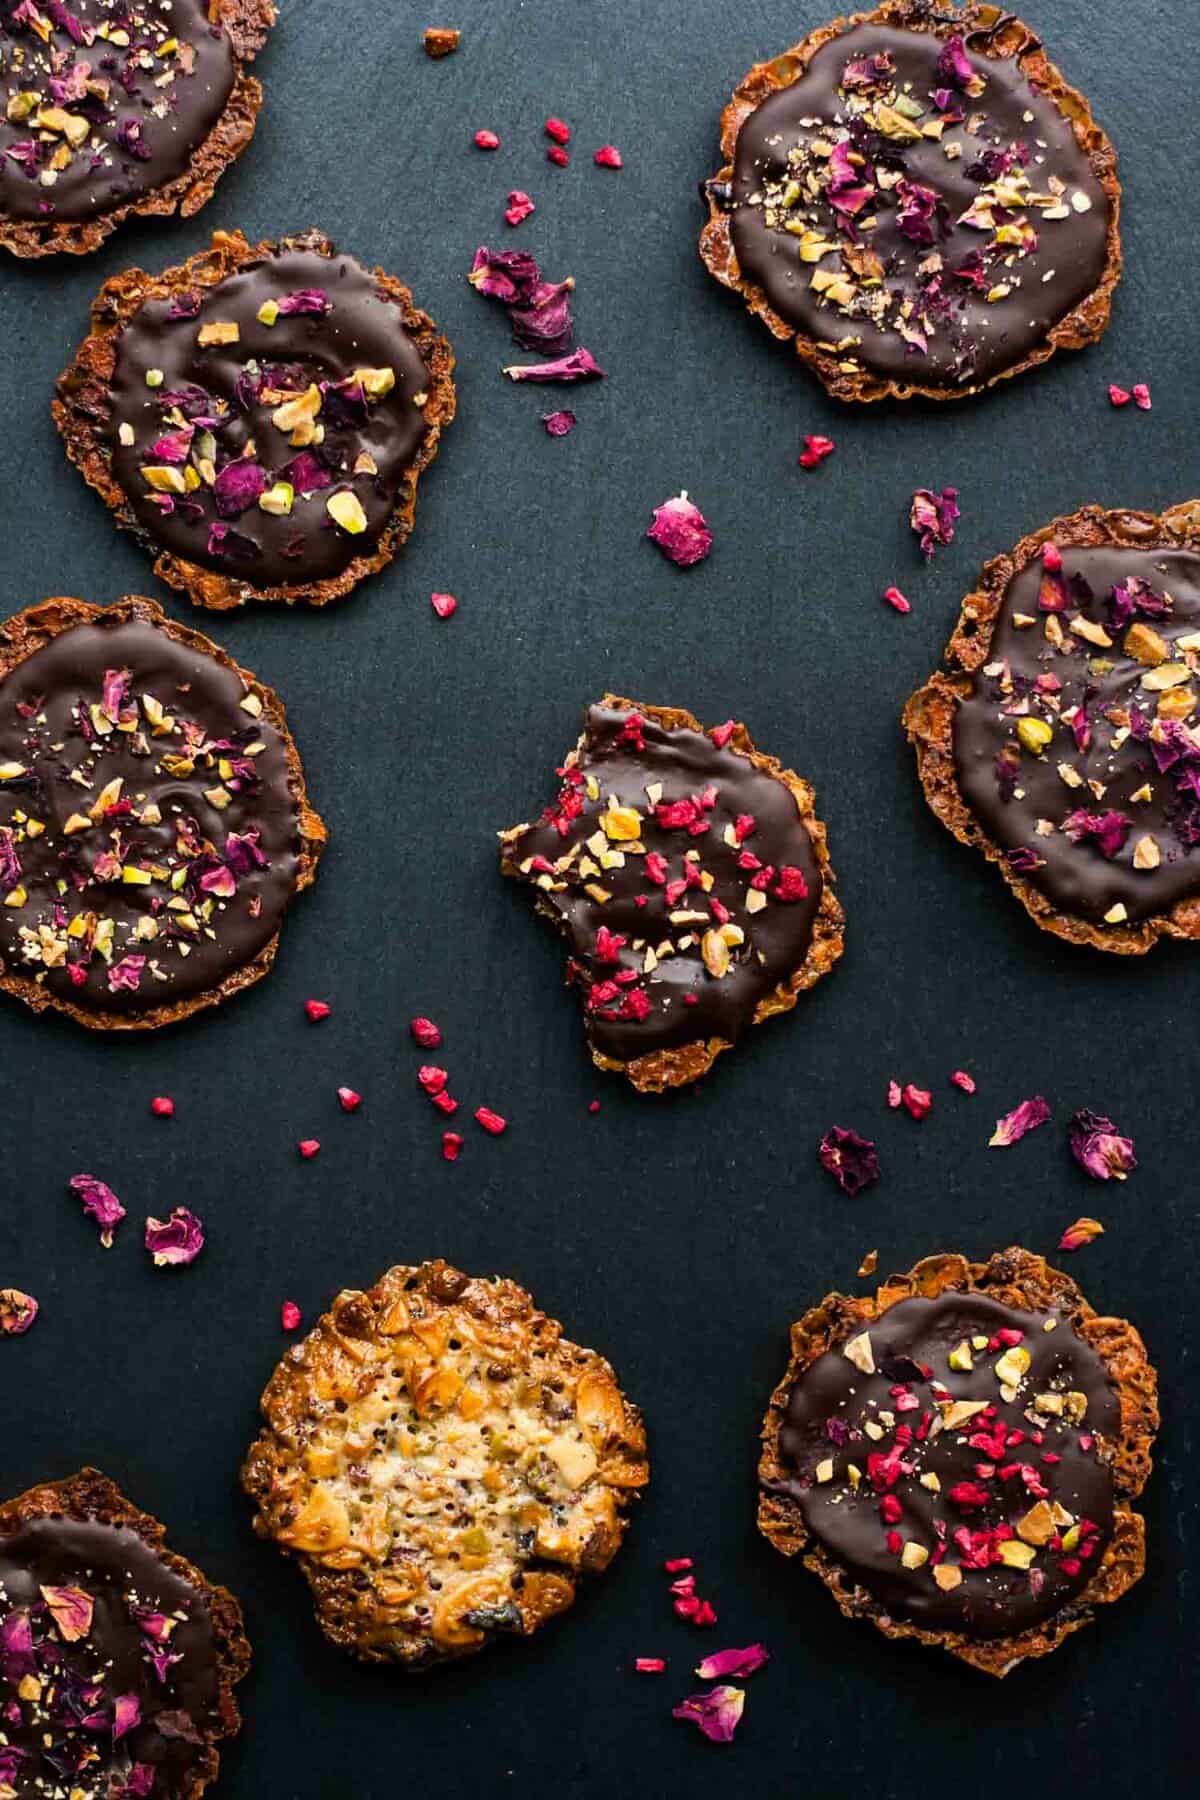 An array of almond florentines with one with bites taken from it.